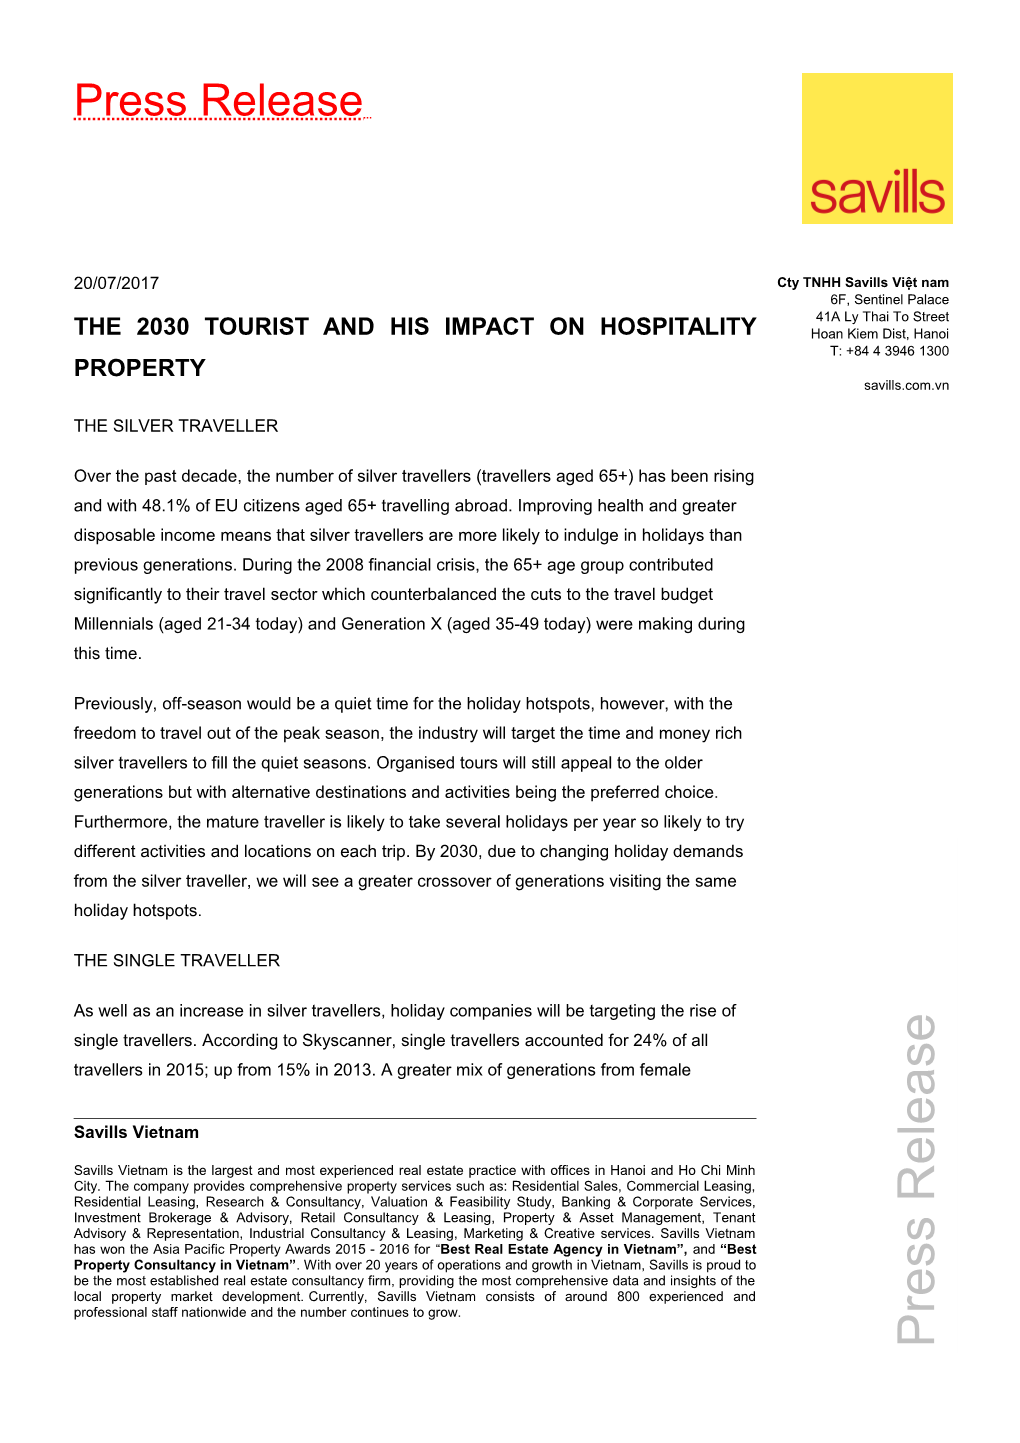 The 2030 Tourist and His Impact on Hospitality Property